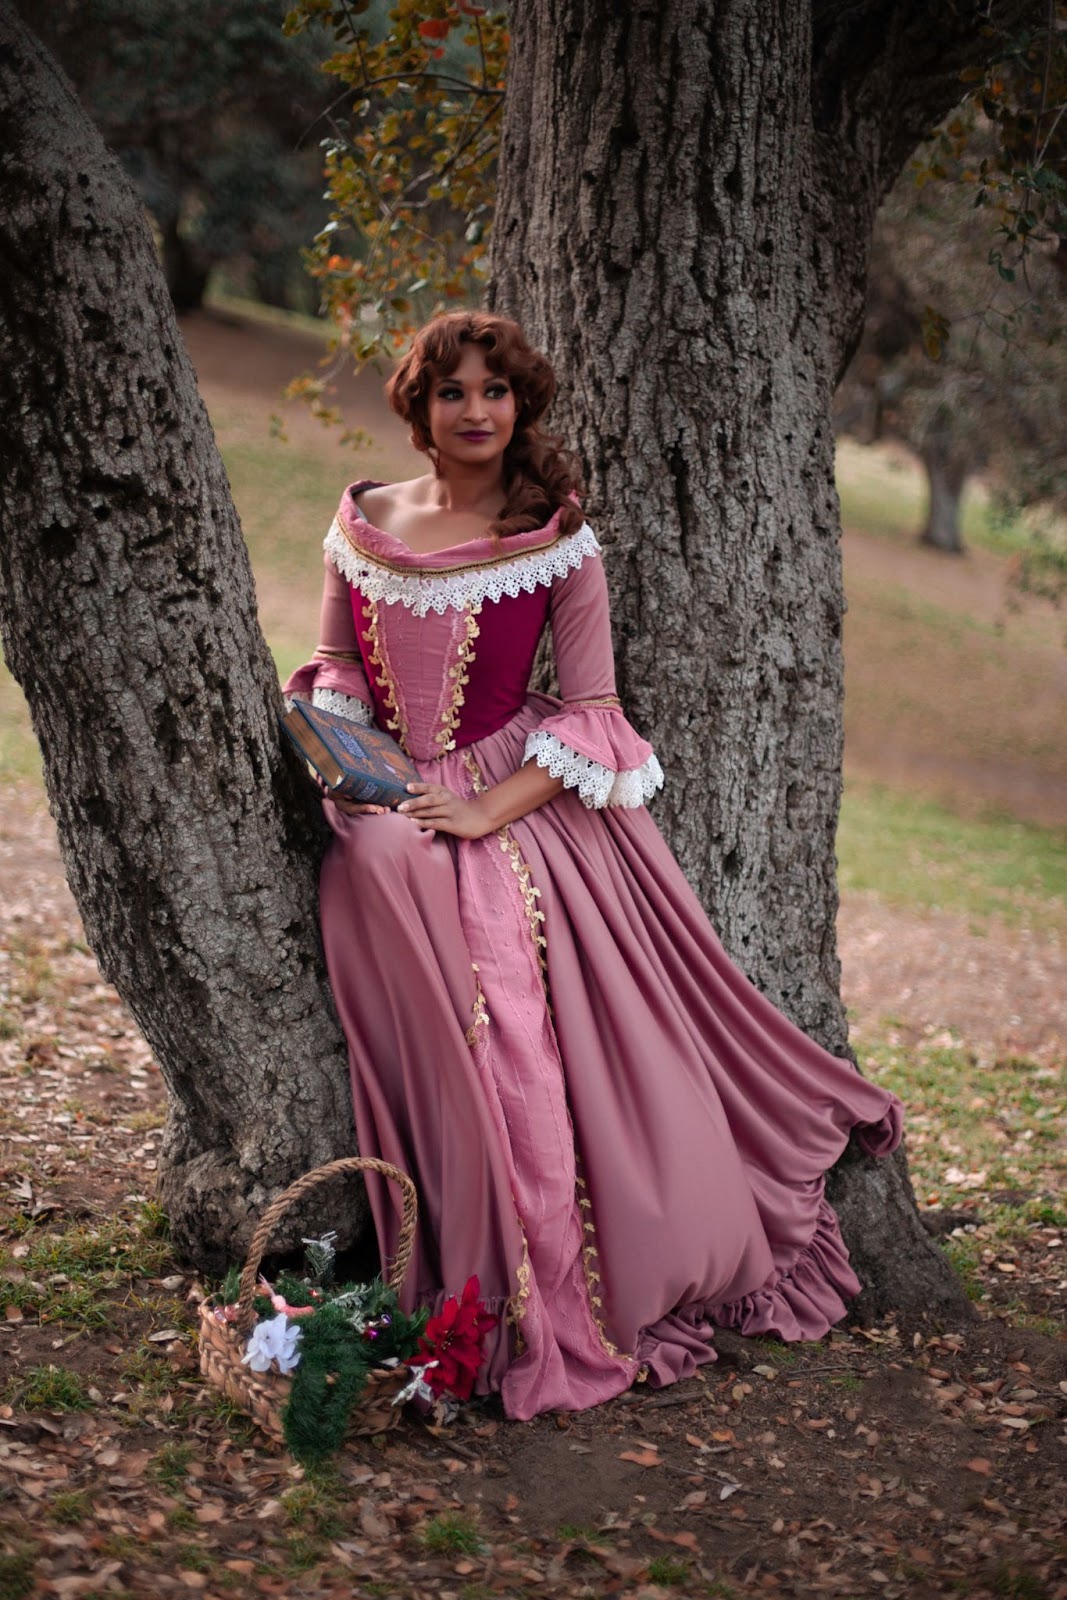 beauty and the beast belle cosplay. pink dress holding a book, curly brown hair